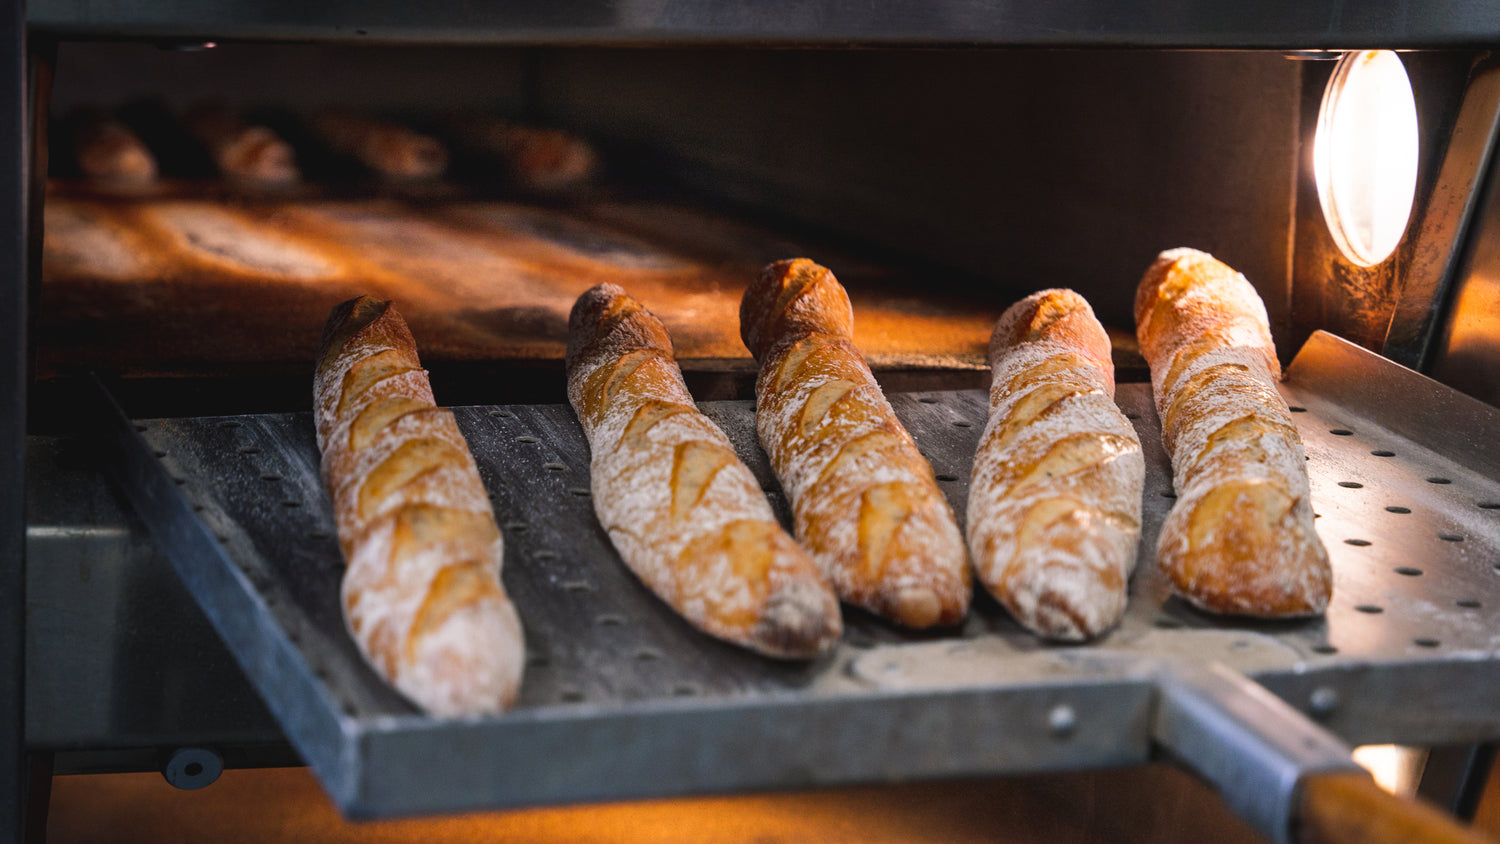 Artisanal bread and baguettes coming out of the Gérard Bakery oven